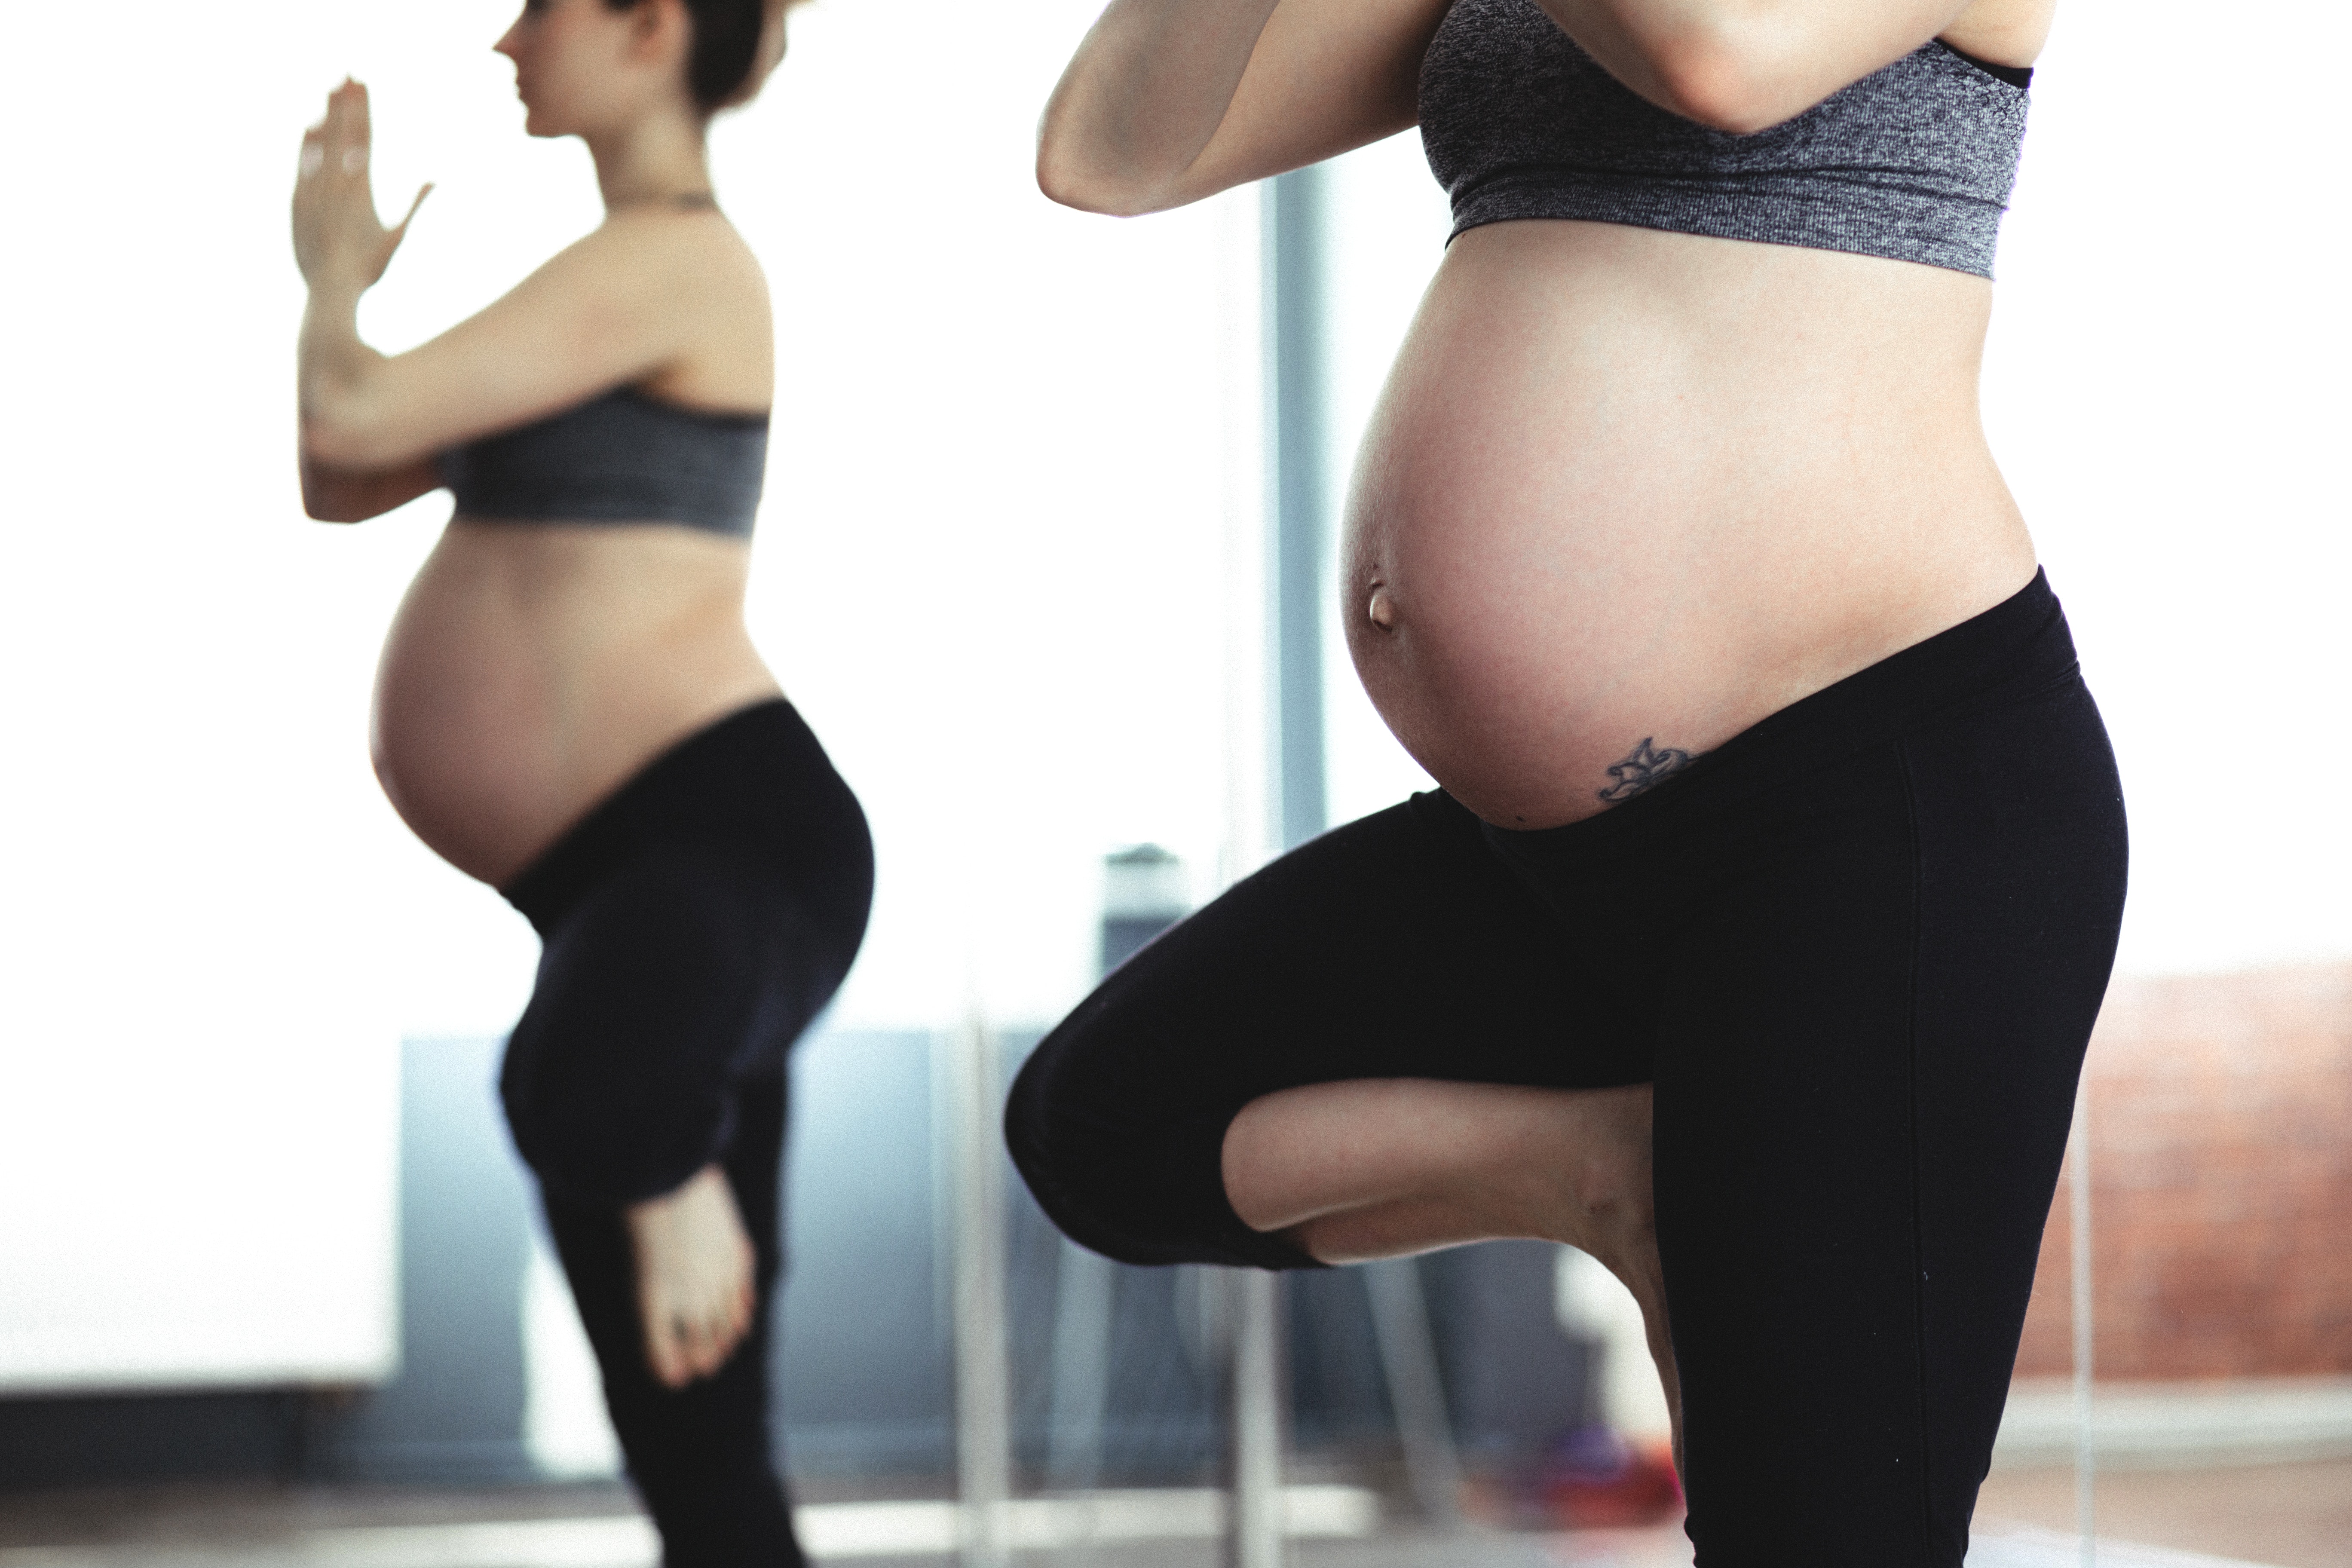 3 Life-Changing Natural Fixes For Common Pregnancy Problems